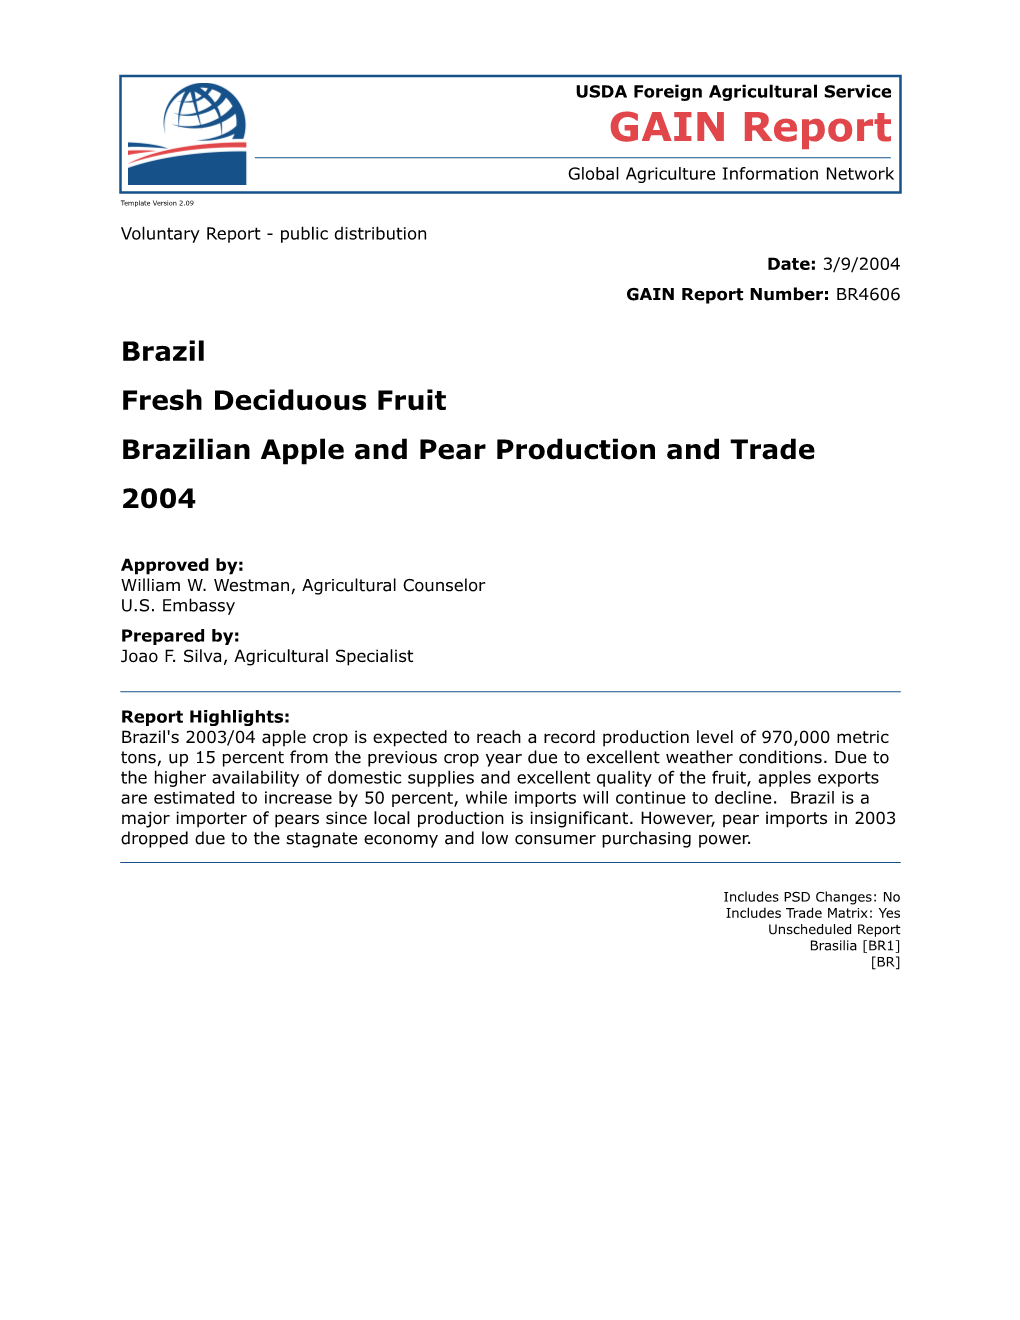 Brazilian Apple and Pear Production and Trade